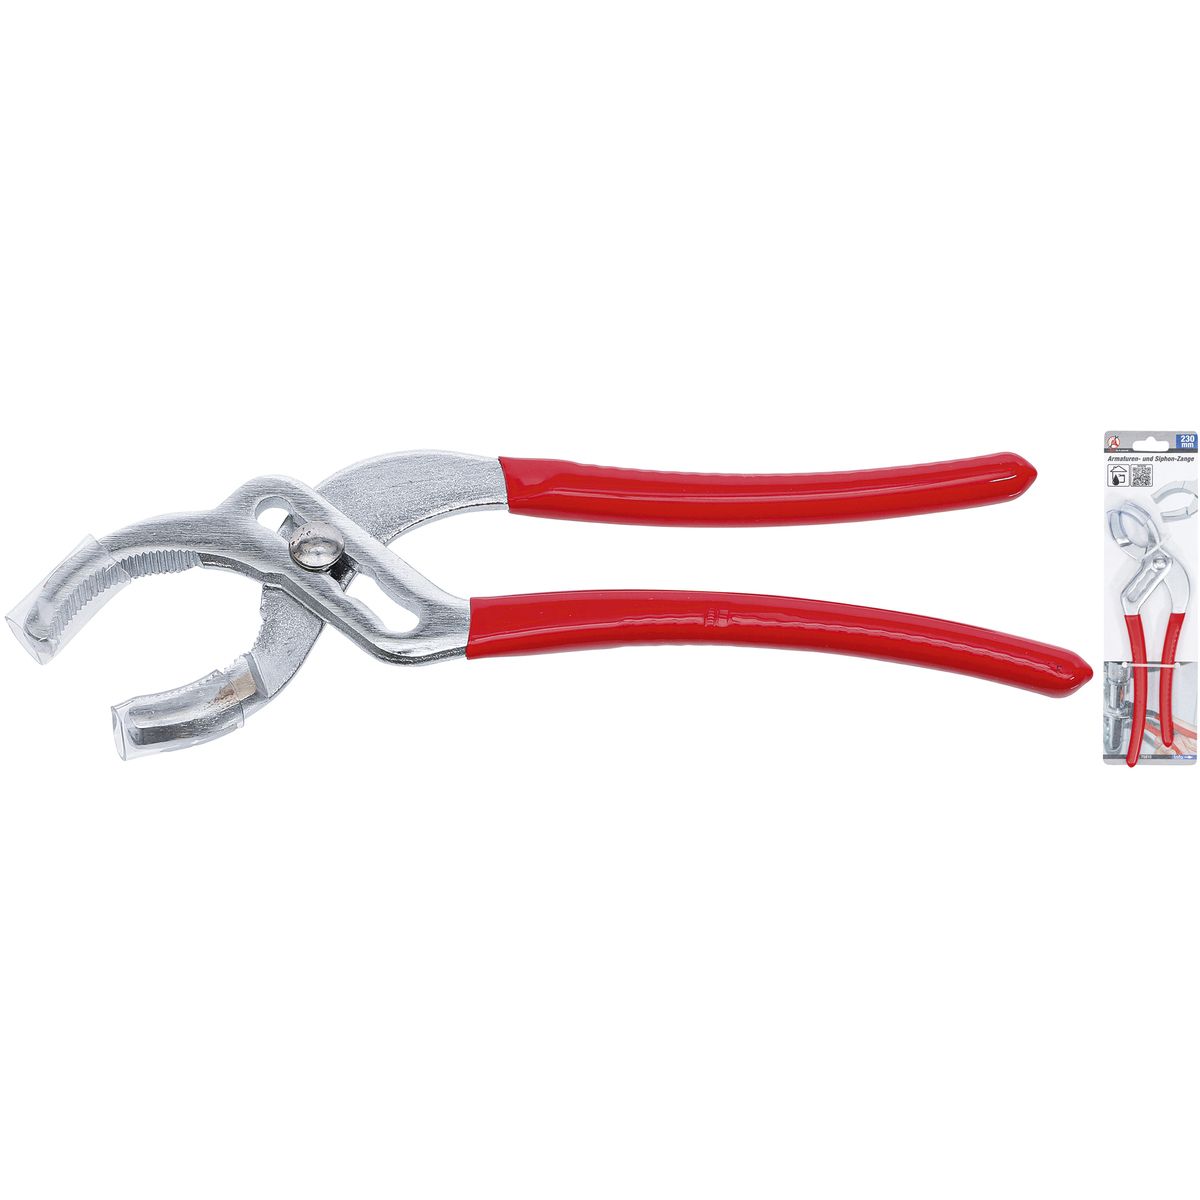 Sanitary Pliers / Connector Pliers | 230 mm